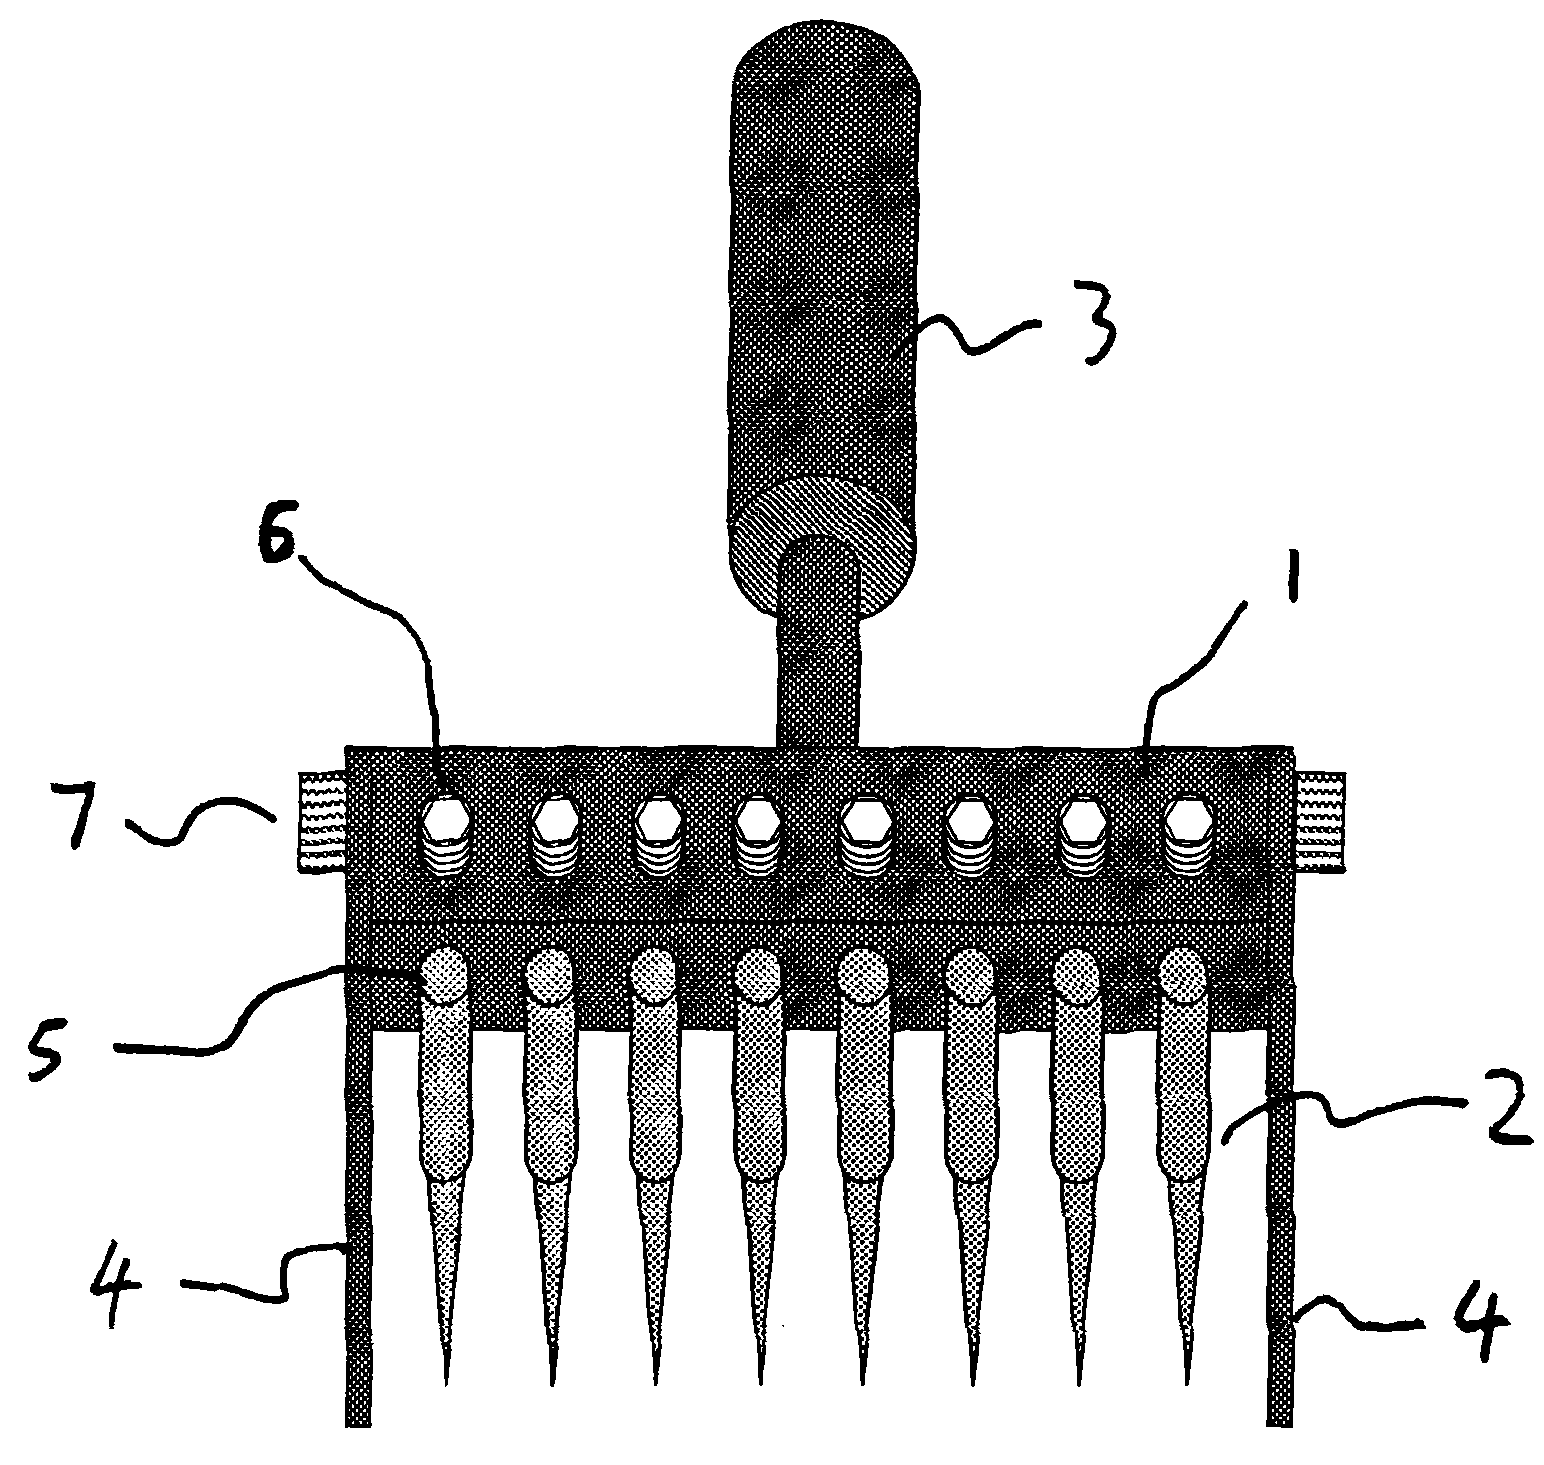 Mechanical damaging device for cell damage processing